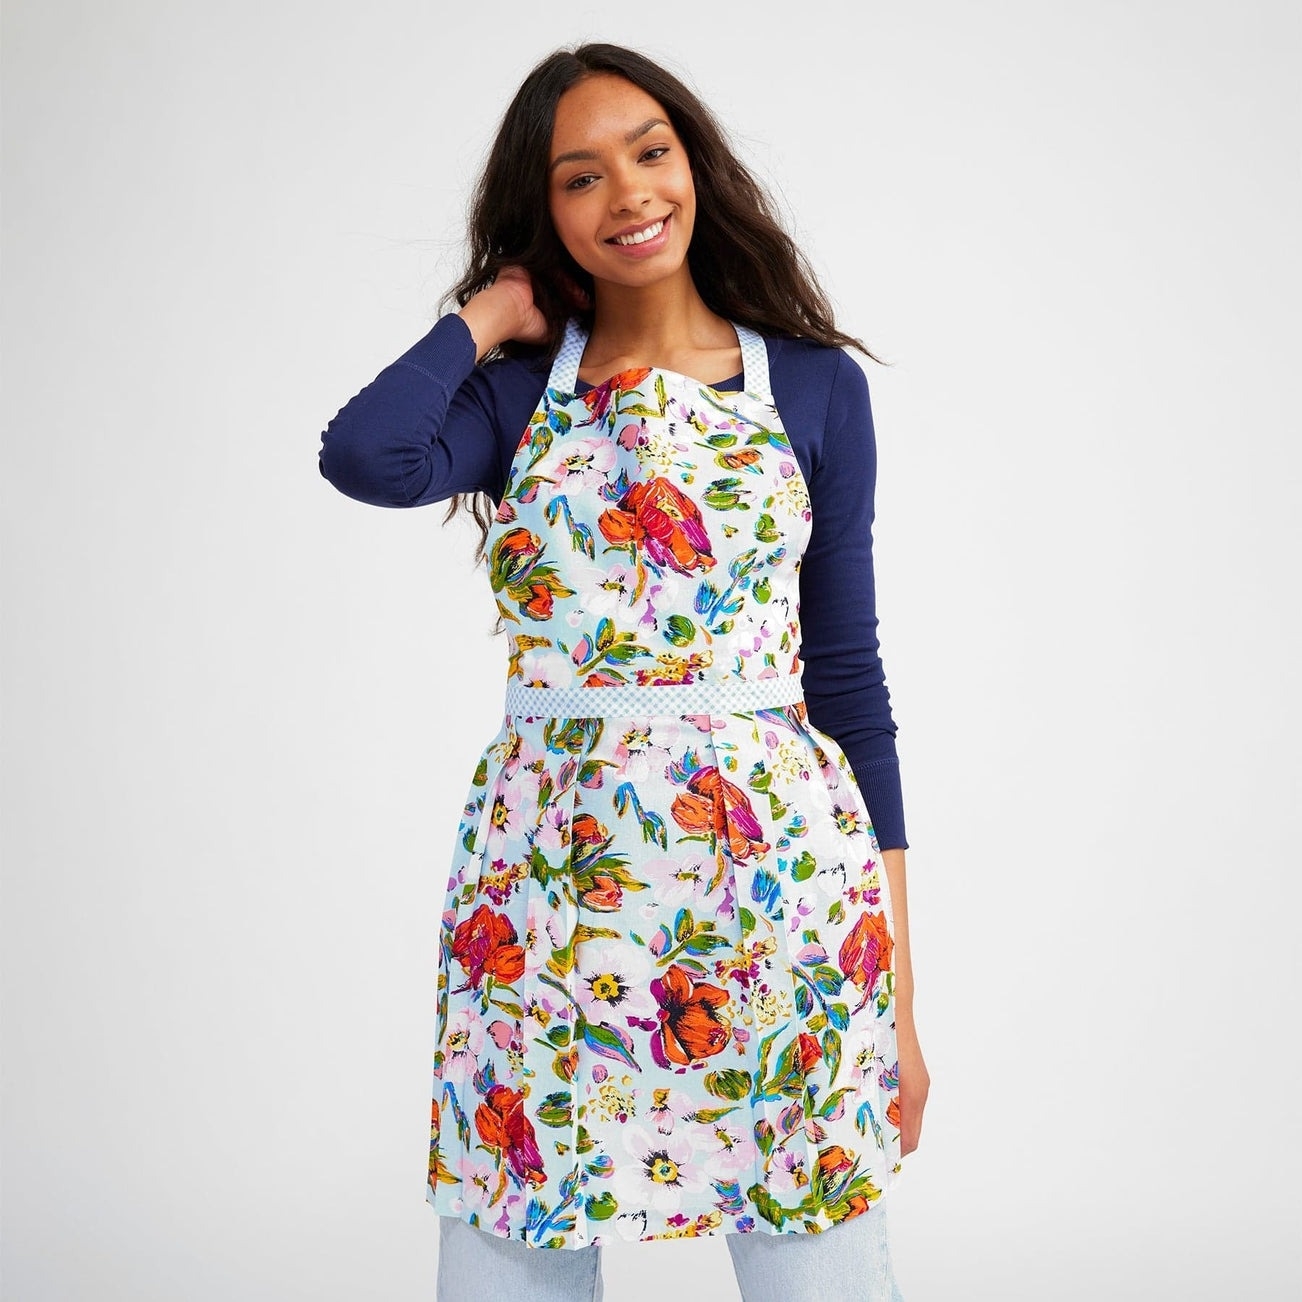 model wearing colorful floral-print apron